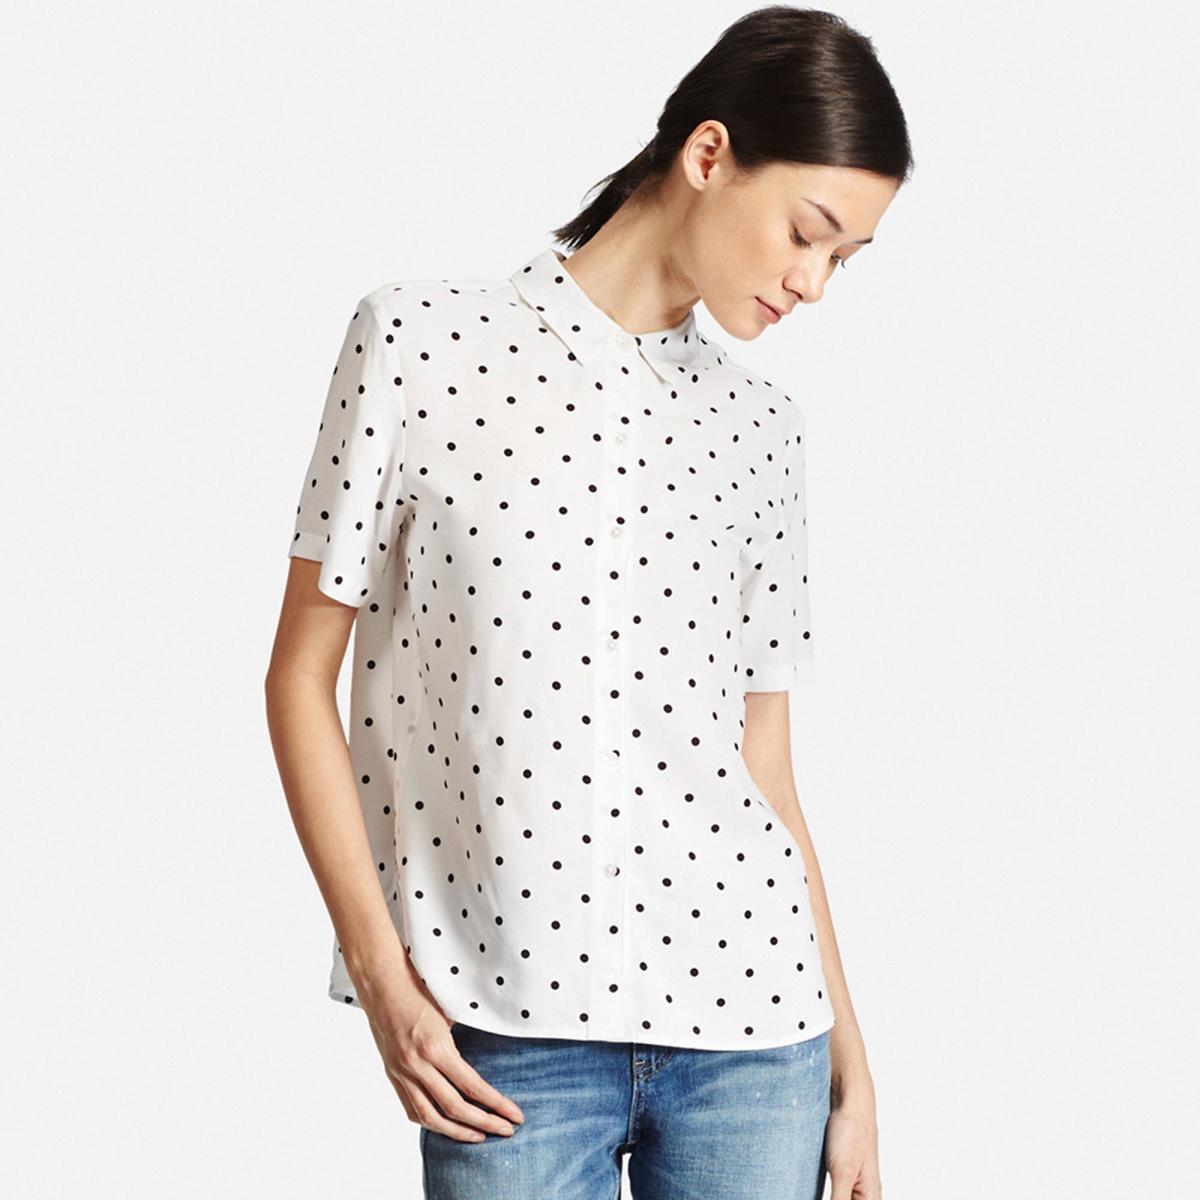 Uniqlo rayon printed and solid blouse, $29.90, available at Uniqlo.